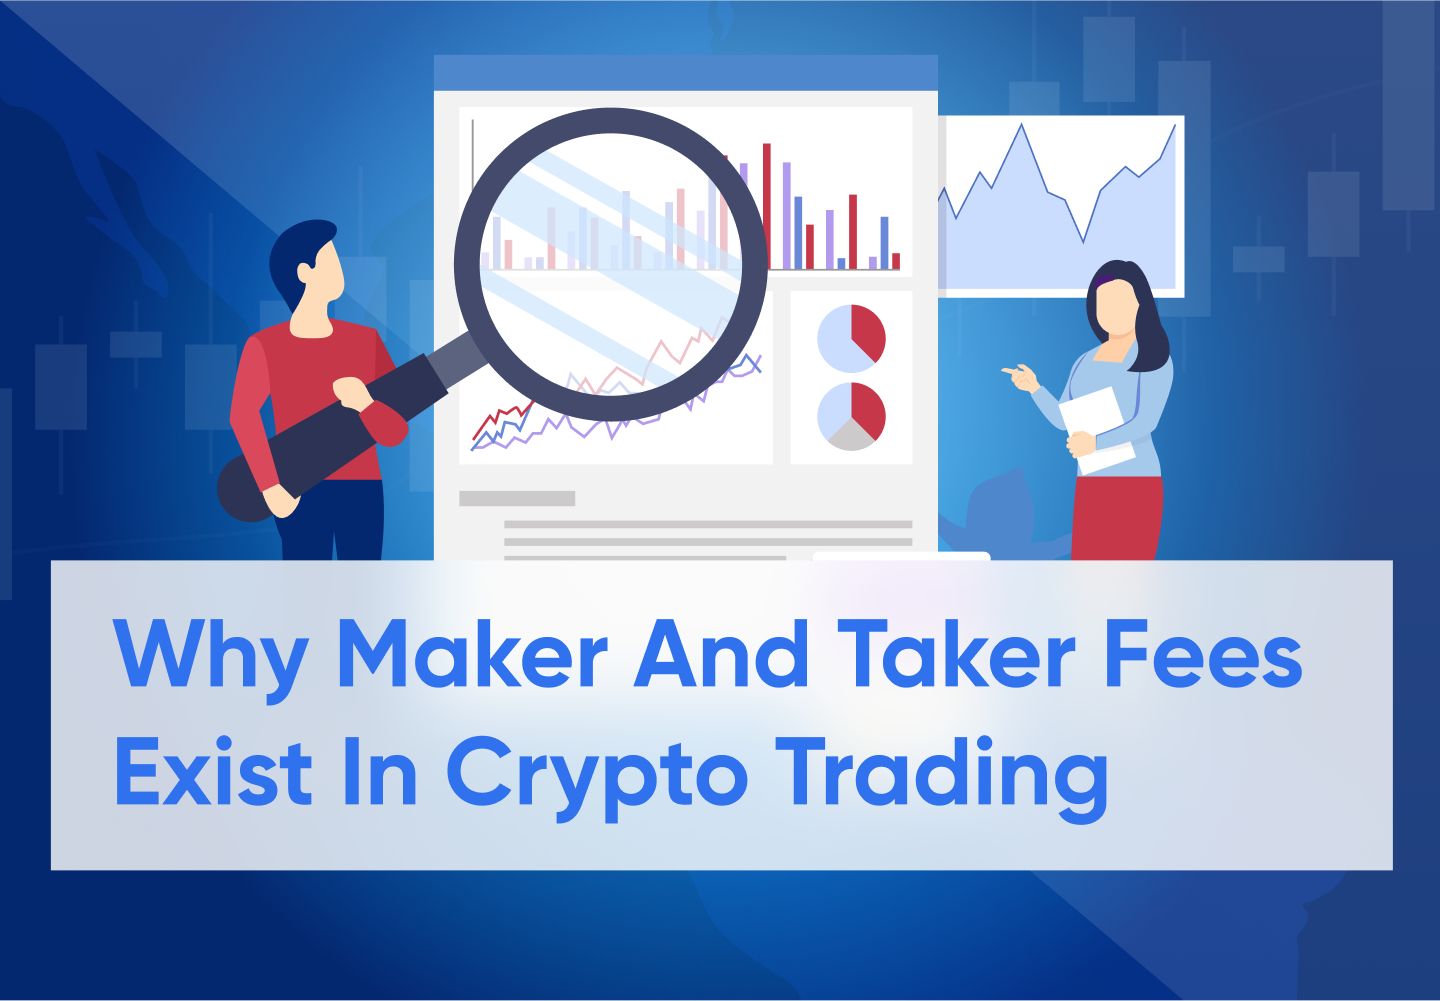 What Are Maker Fees and Taker Fees in Crypto?